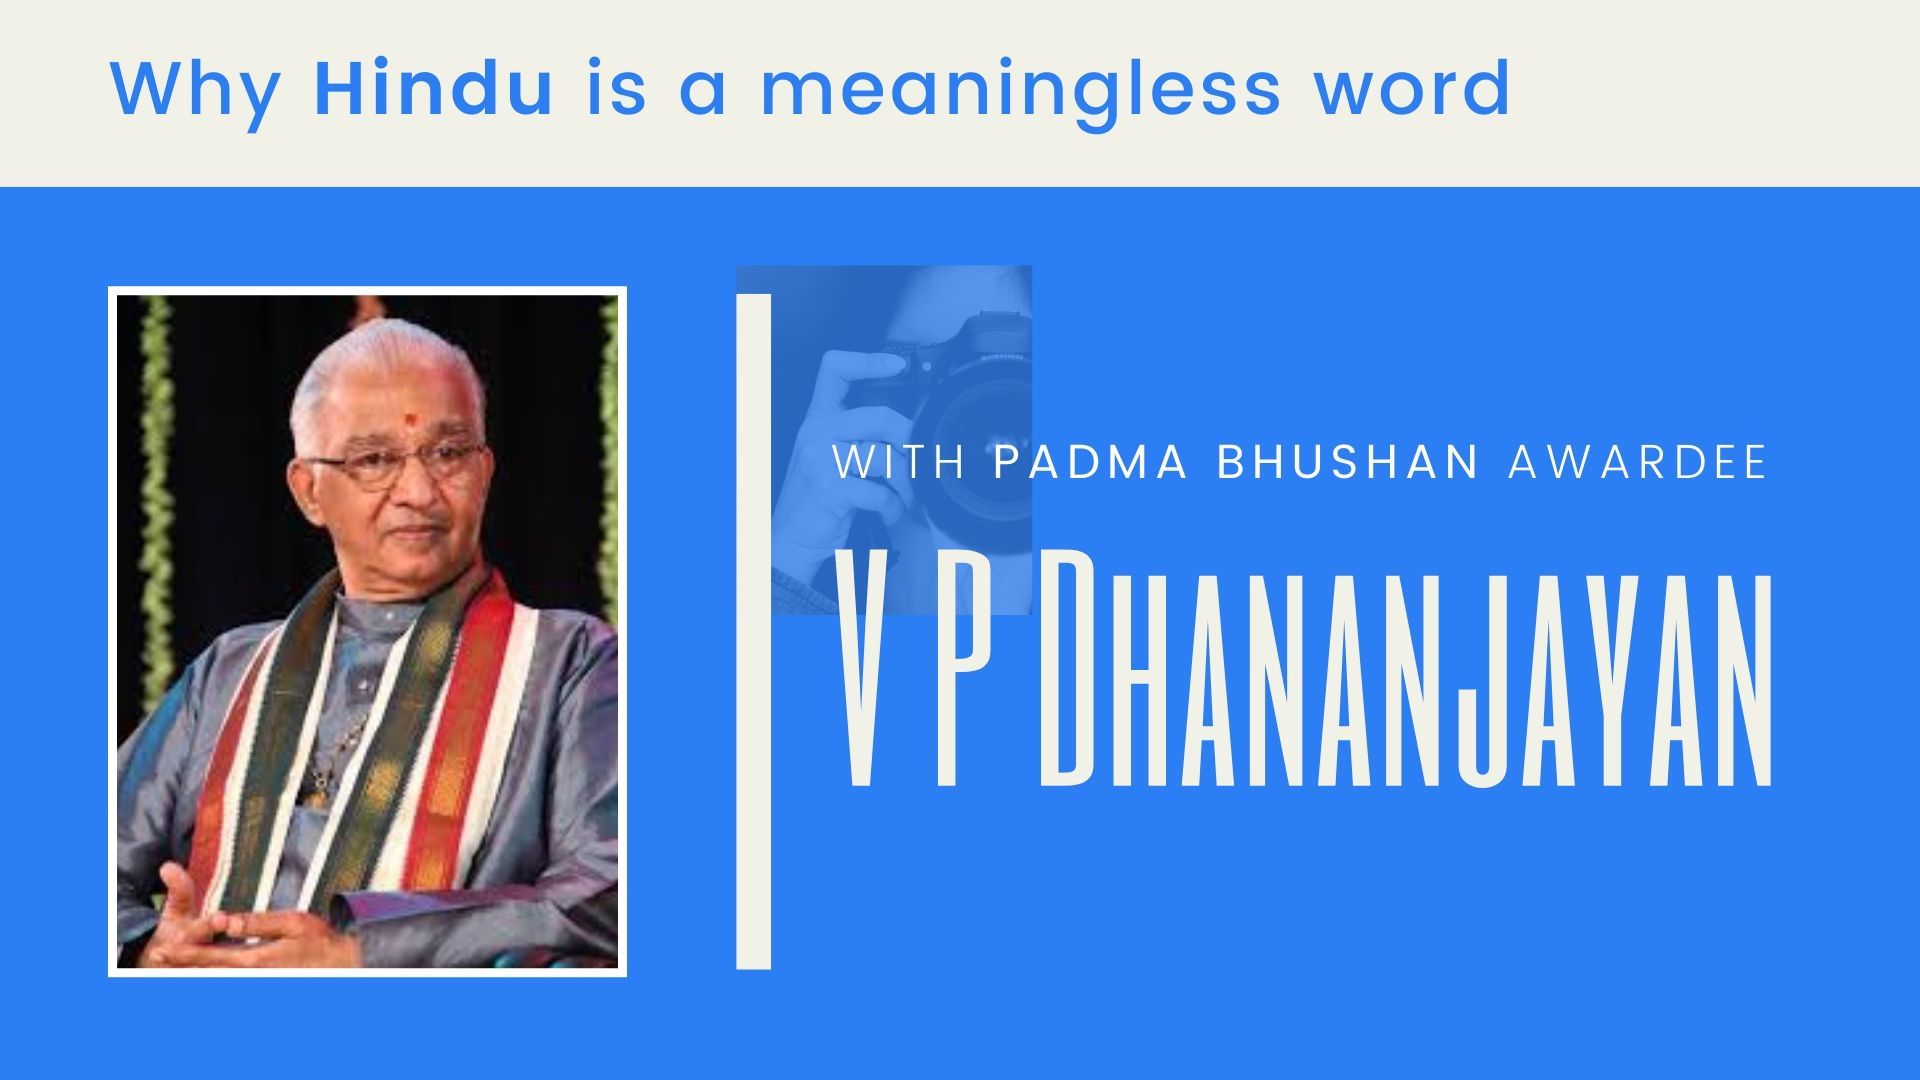 Hindu is a meaningless word that was used by others to keep us divided, says Padma Bhushan awardee V P Dhananjayan in this in-depth interview. One of the top-notch exponents of Bharatanatyam, he explains why he does not use the names Varnam and Thillana in his margams. A must watch!